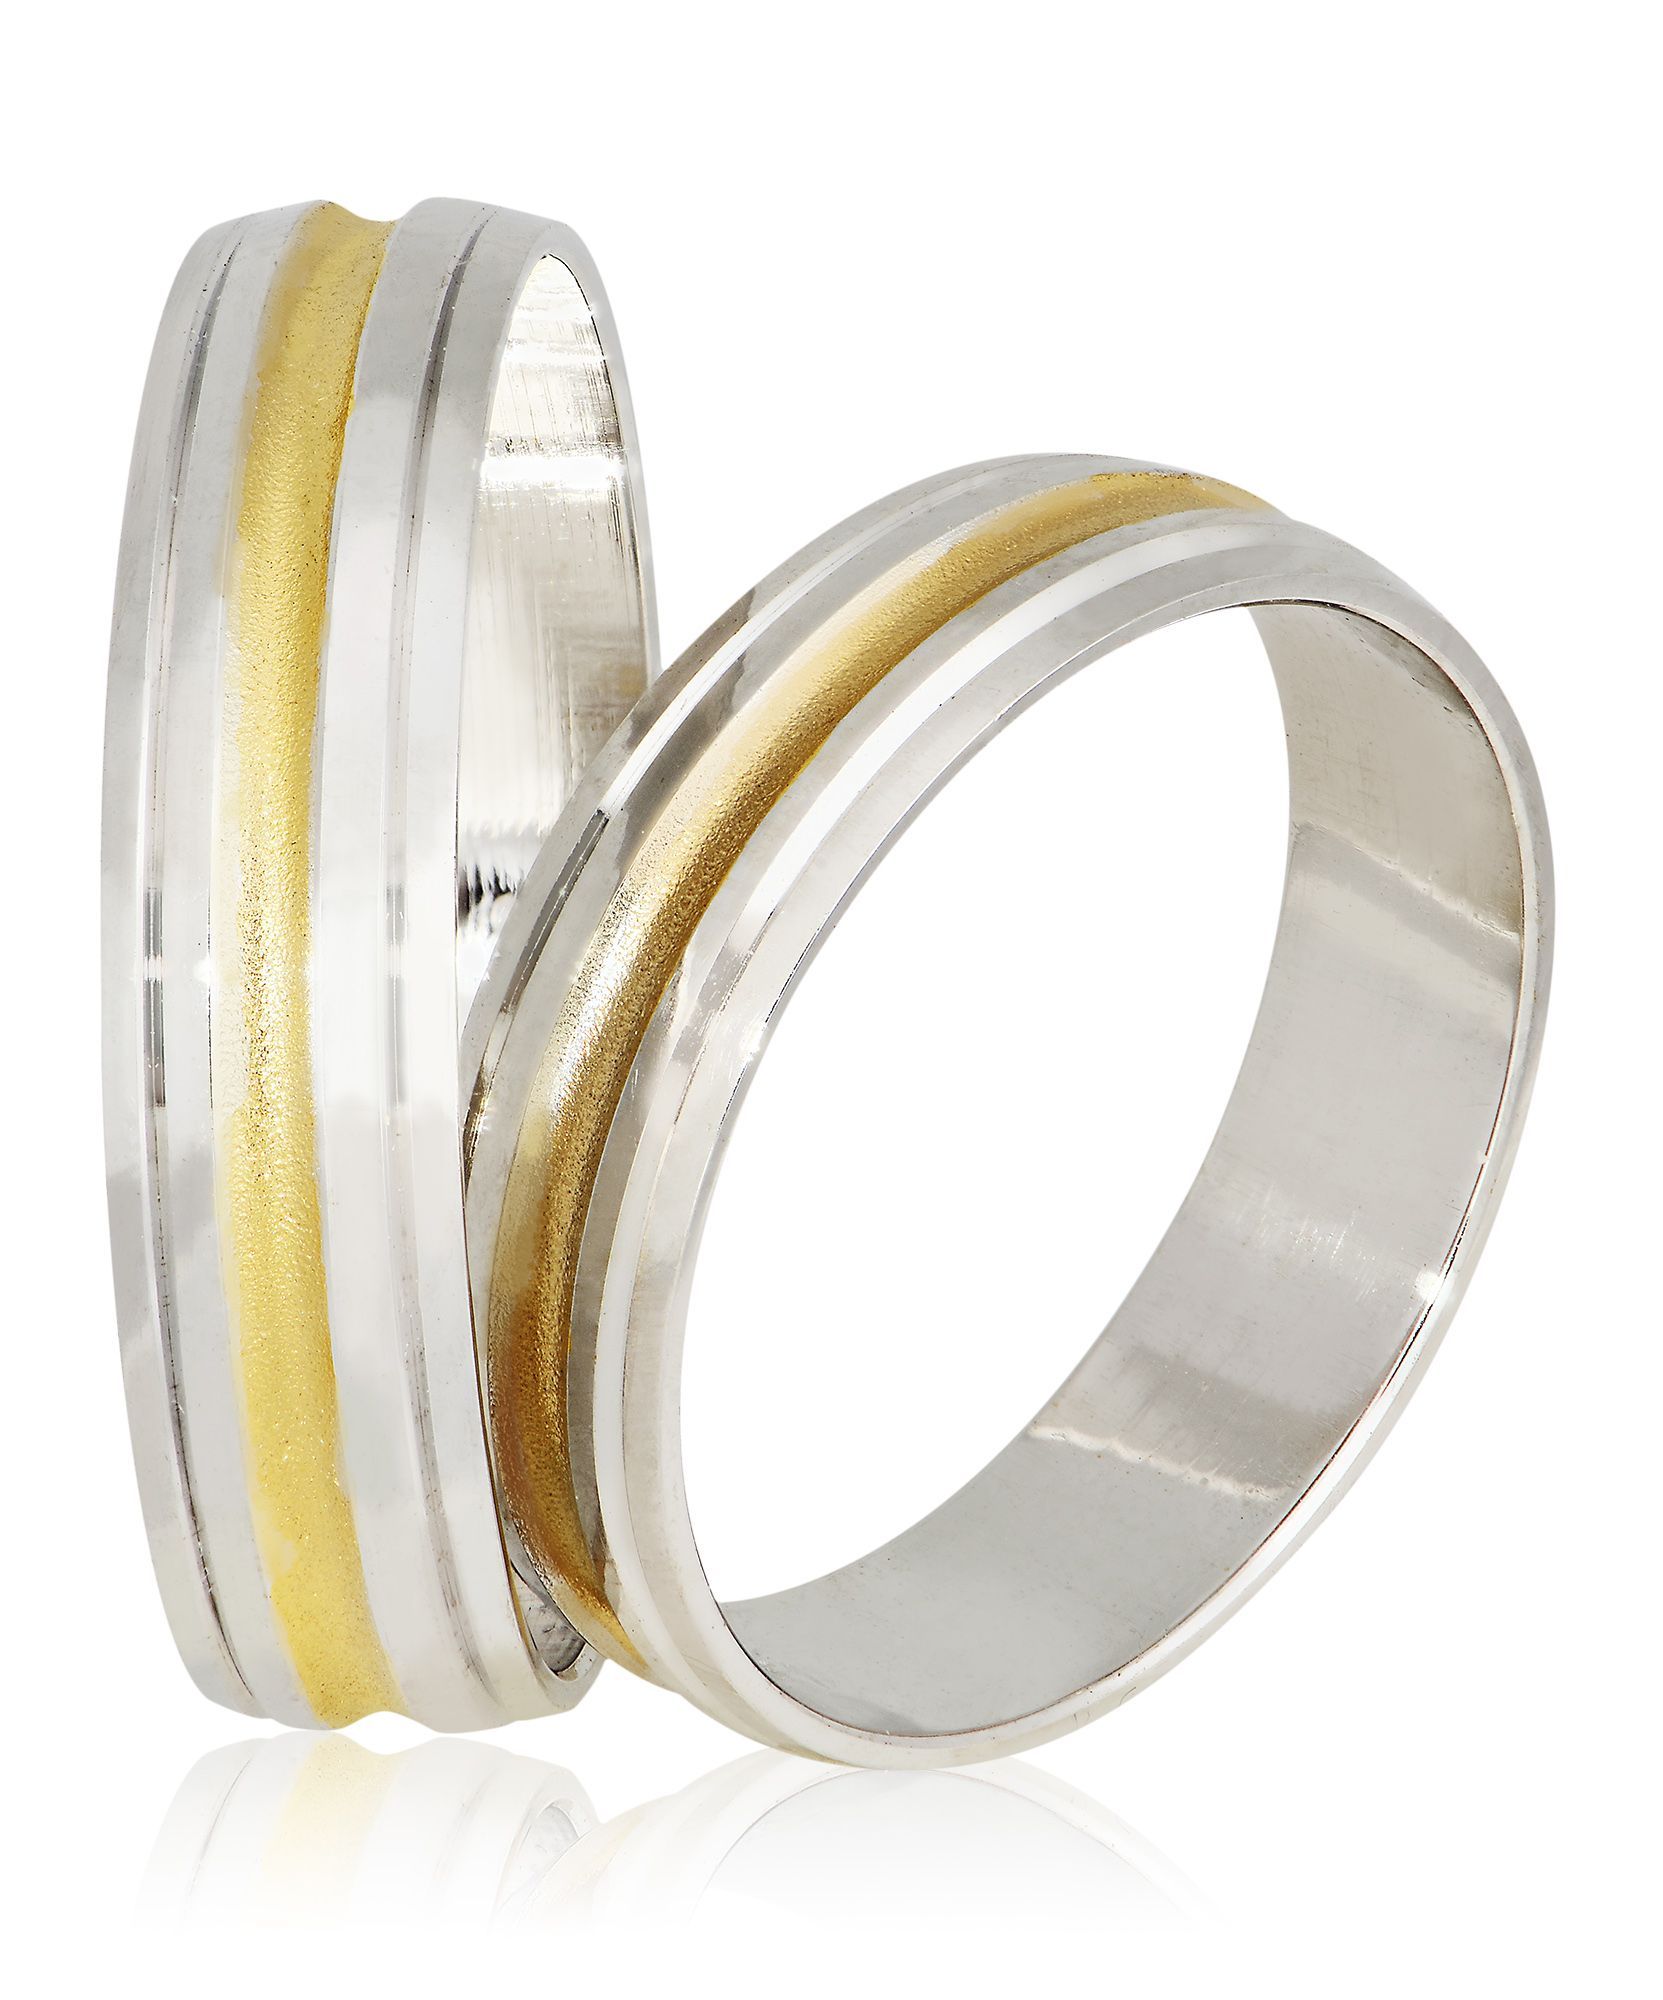 White gold & gold wedding rings 5mm (code Sxx3)